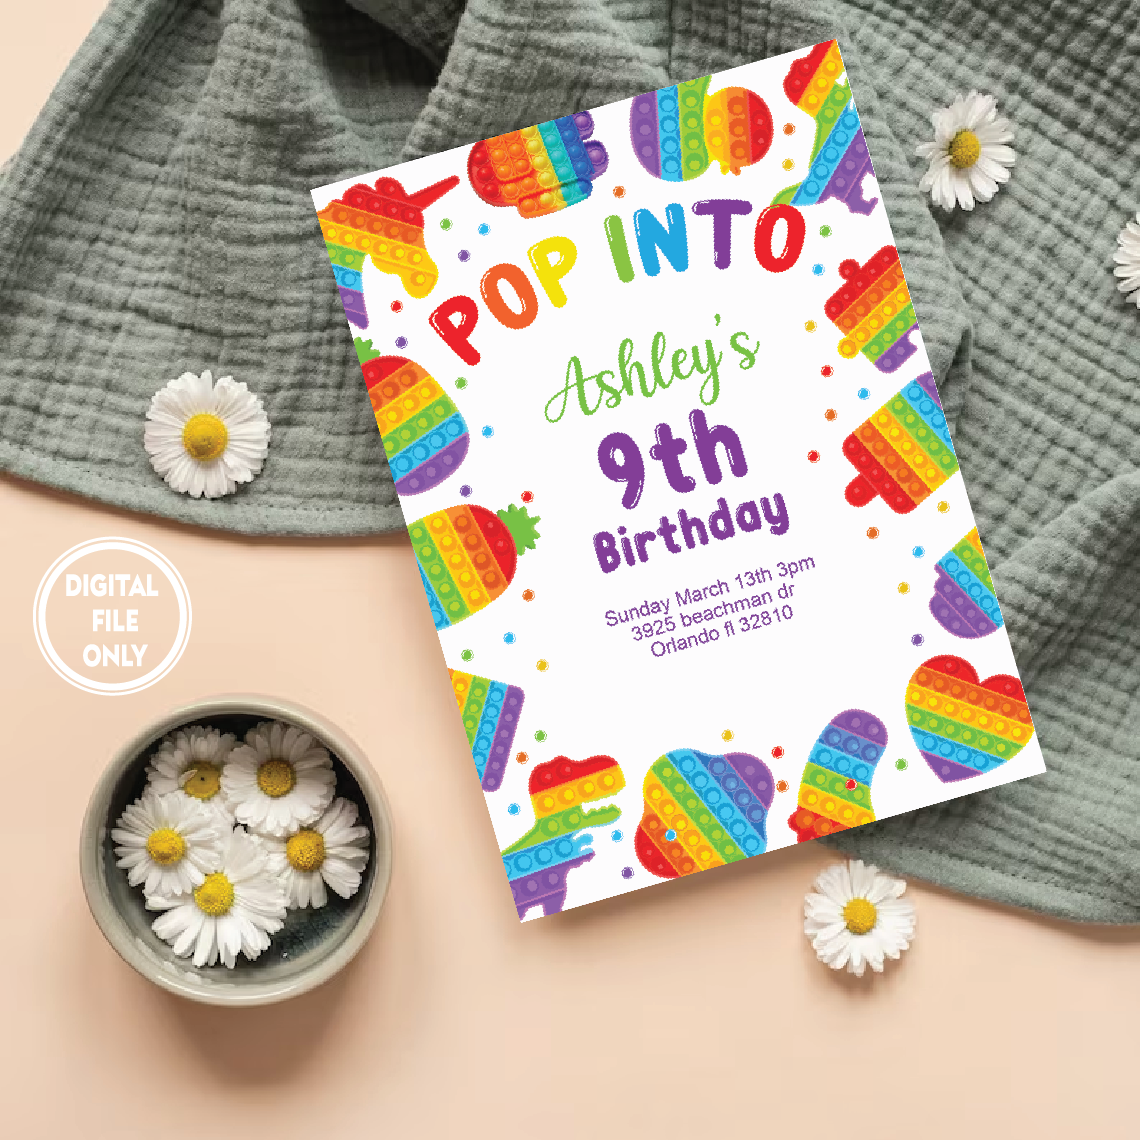 Personalized File Kids Birthday Invitation Pop It png Editable For Boy and Girl Kids invitation, Invite Instant Download ! PNG File Only